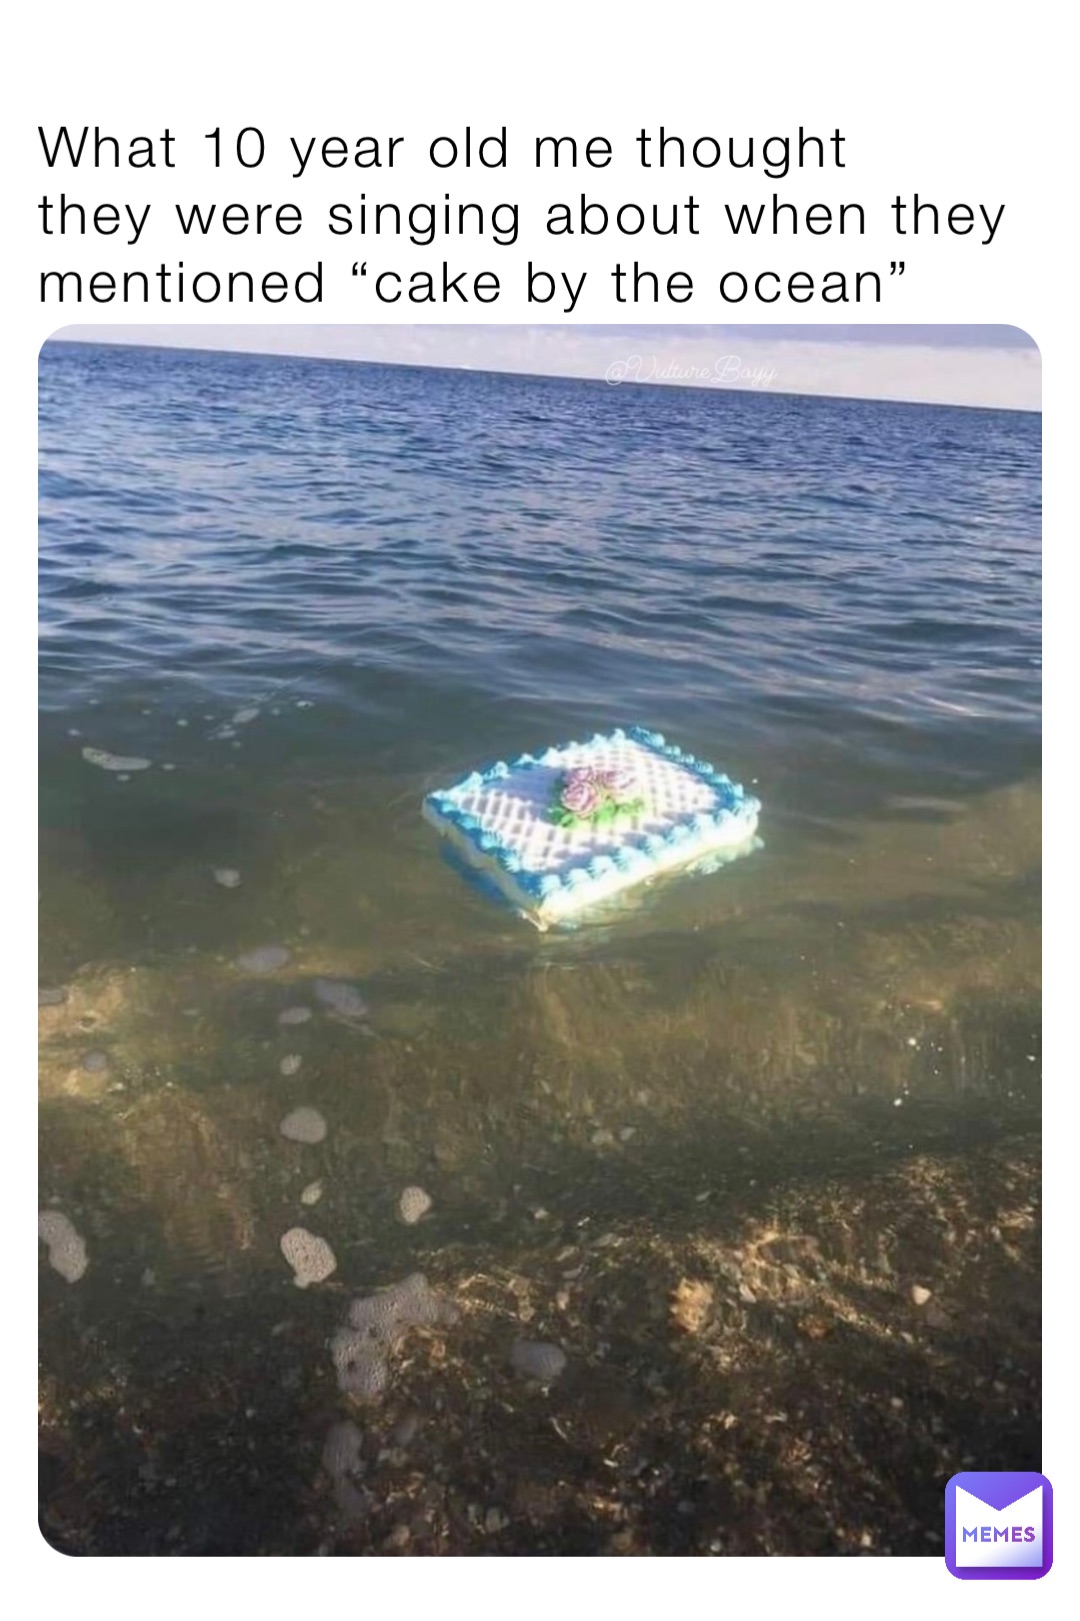 What 10 year old me thought 
they were singing about when they
mentioned “cake by the ocean”